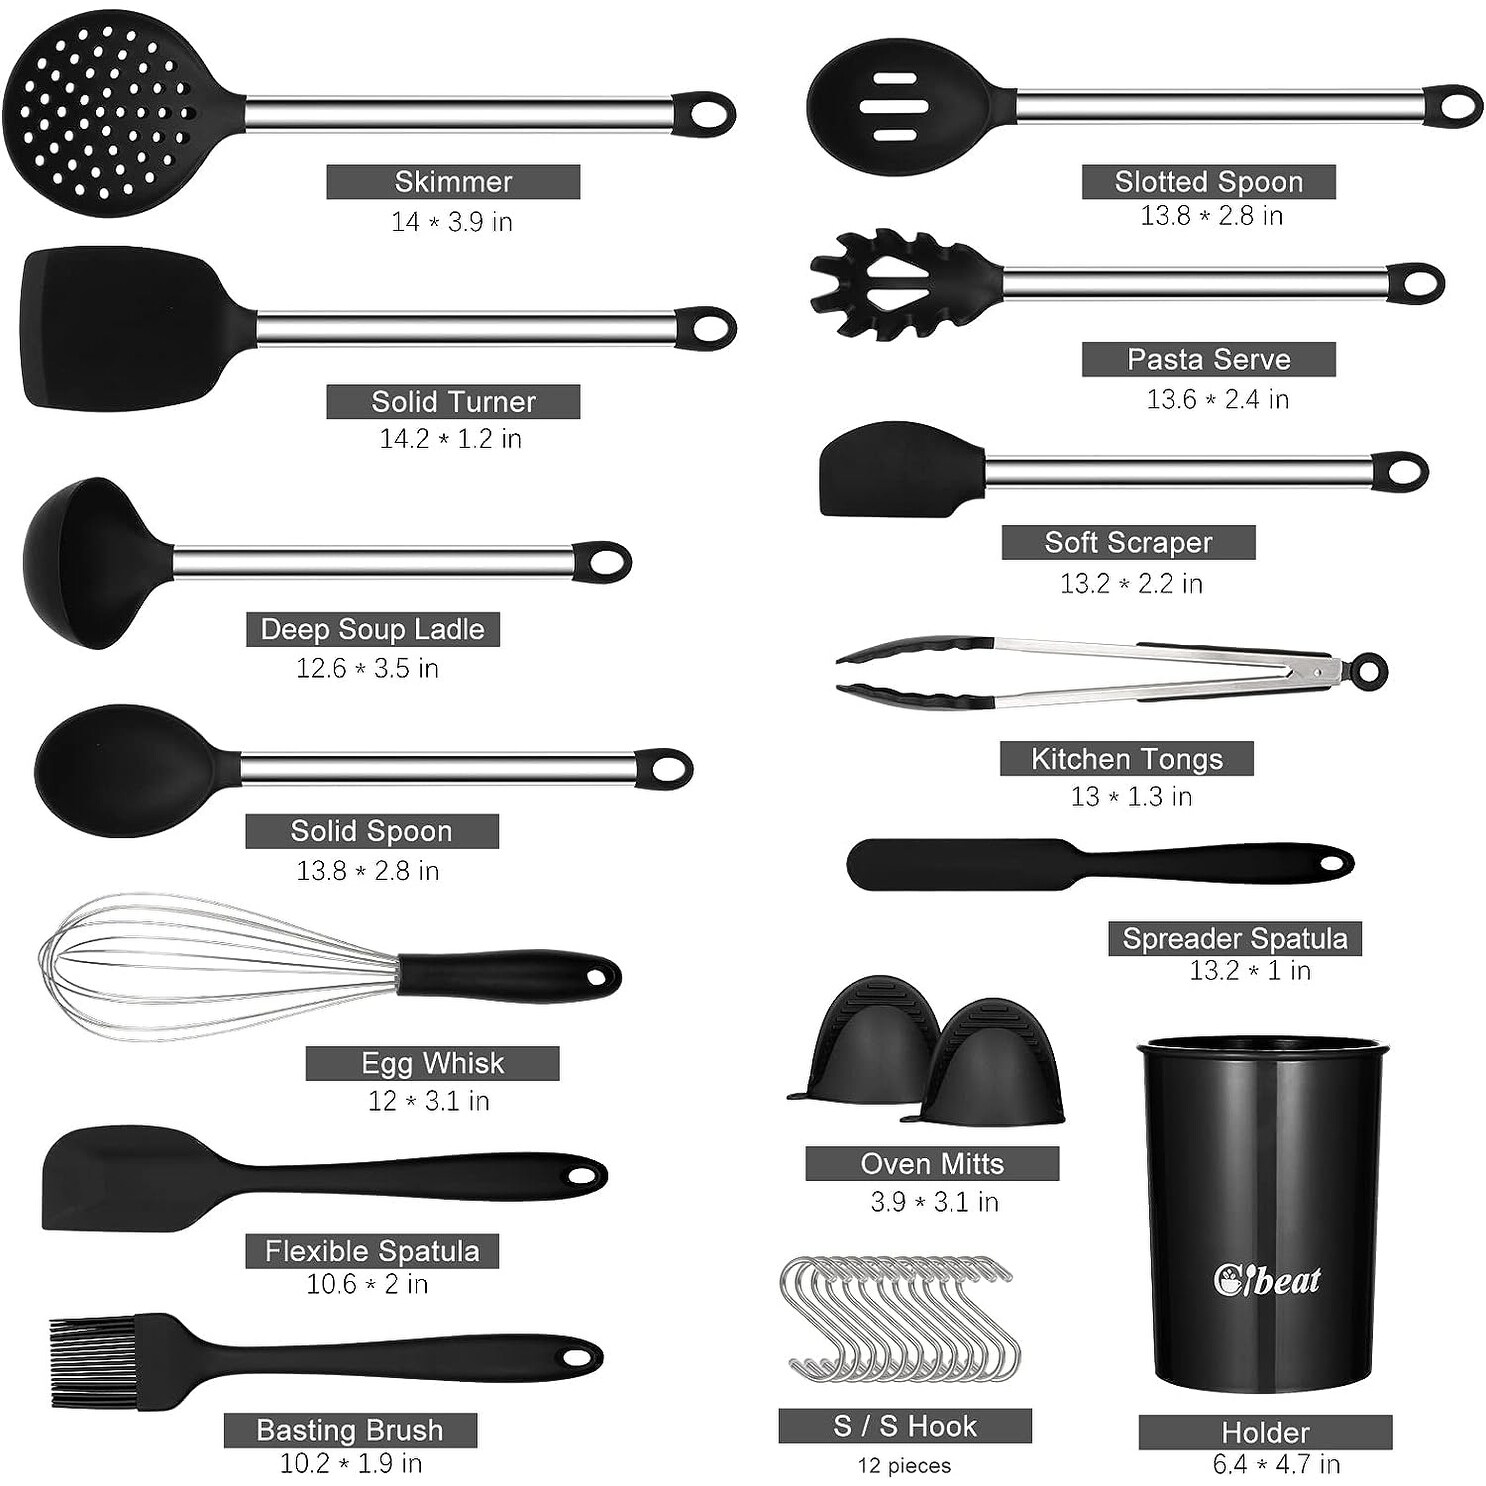 https://ak1.ostkcdn.com/images/products/is/images/direct/cfdfe229a946c798e5bc994f004ca9f85796fc09/Kitchen-Utensils-Set-with-Holder%2C-Silicone-Cooking-Utensils-Gadget.jpg